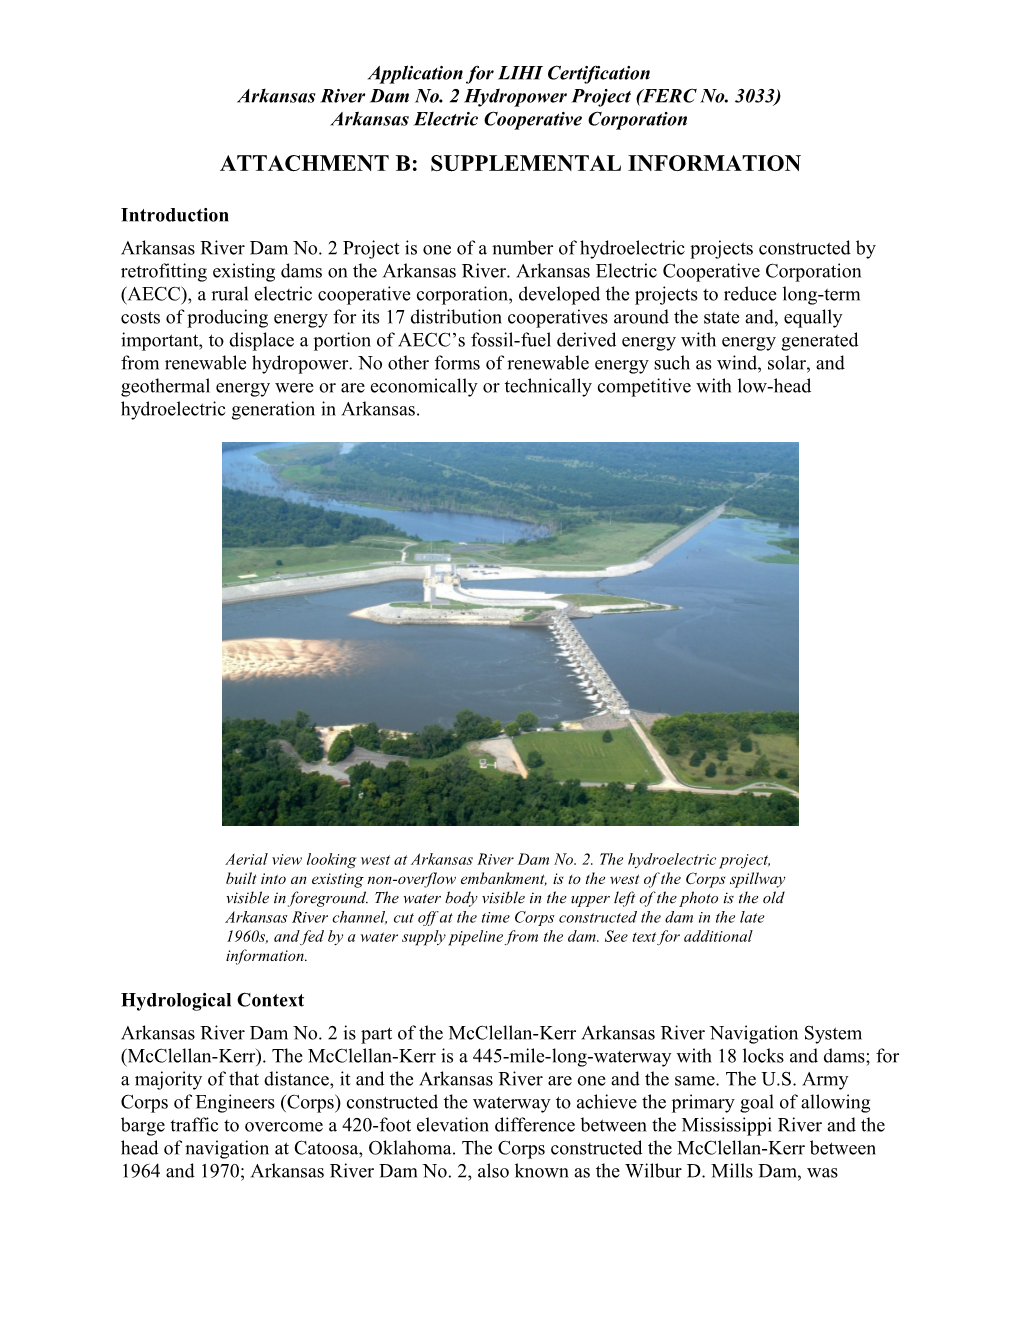 Application for Low Impact Hydropower Certification